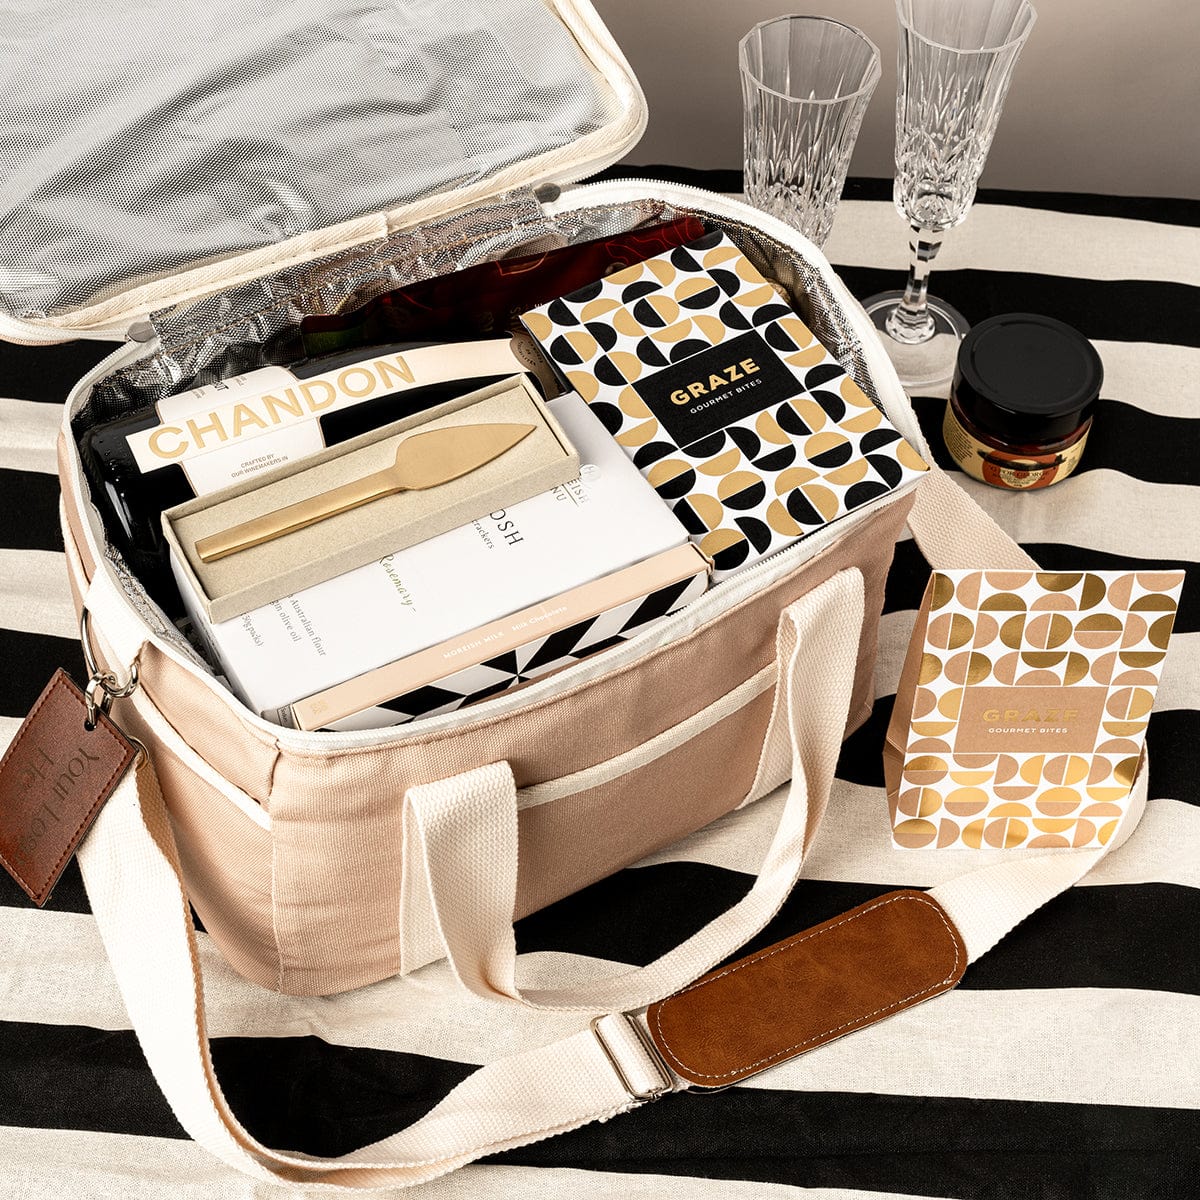 Taupe cooler bag gift with acrylic champagne flutes, Chandon, capsicum tapenade, brass gold cheese knife, and a selection of gourmet snack items.